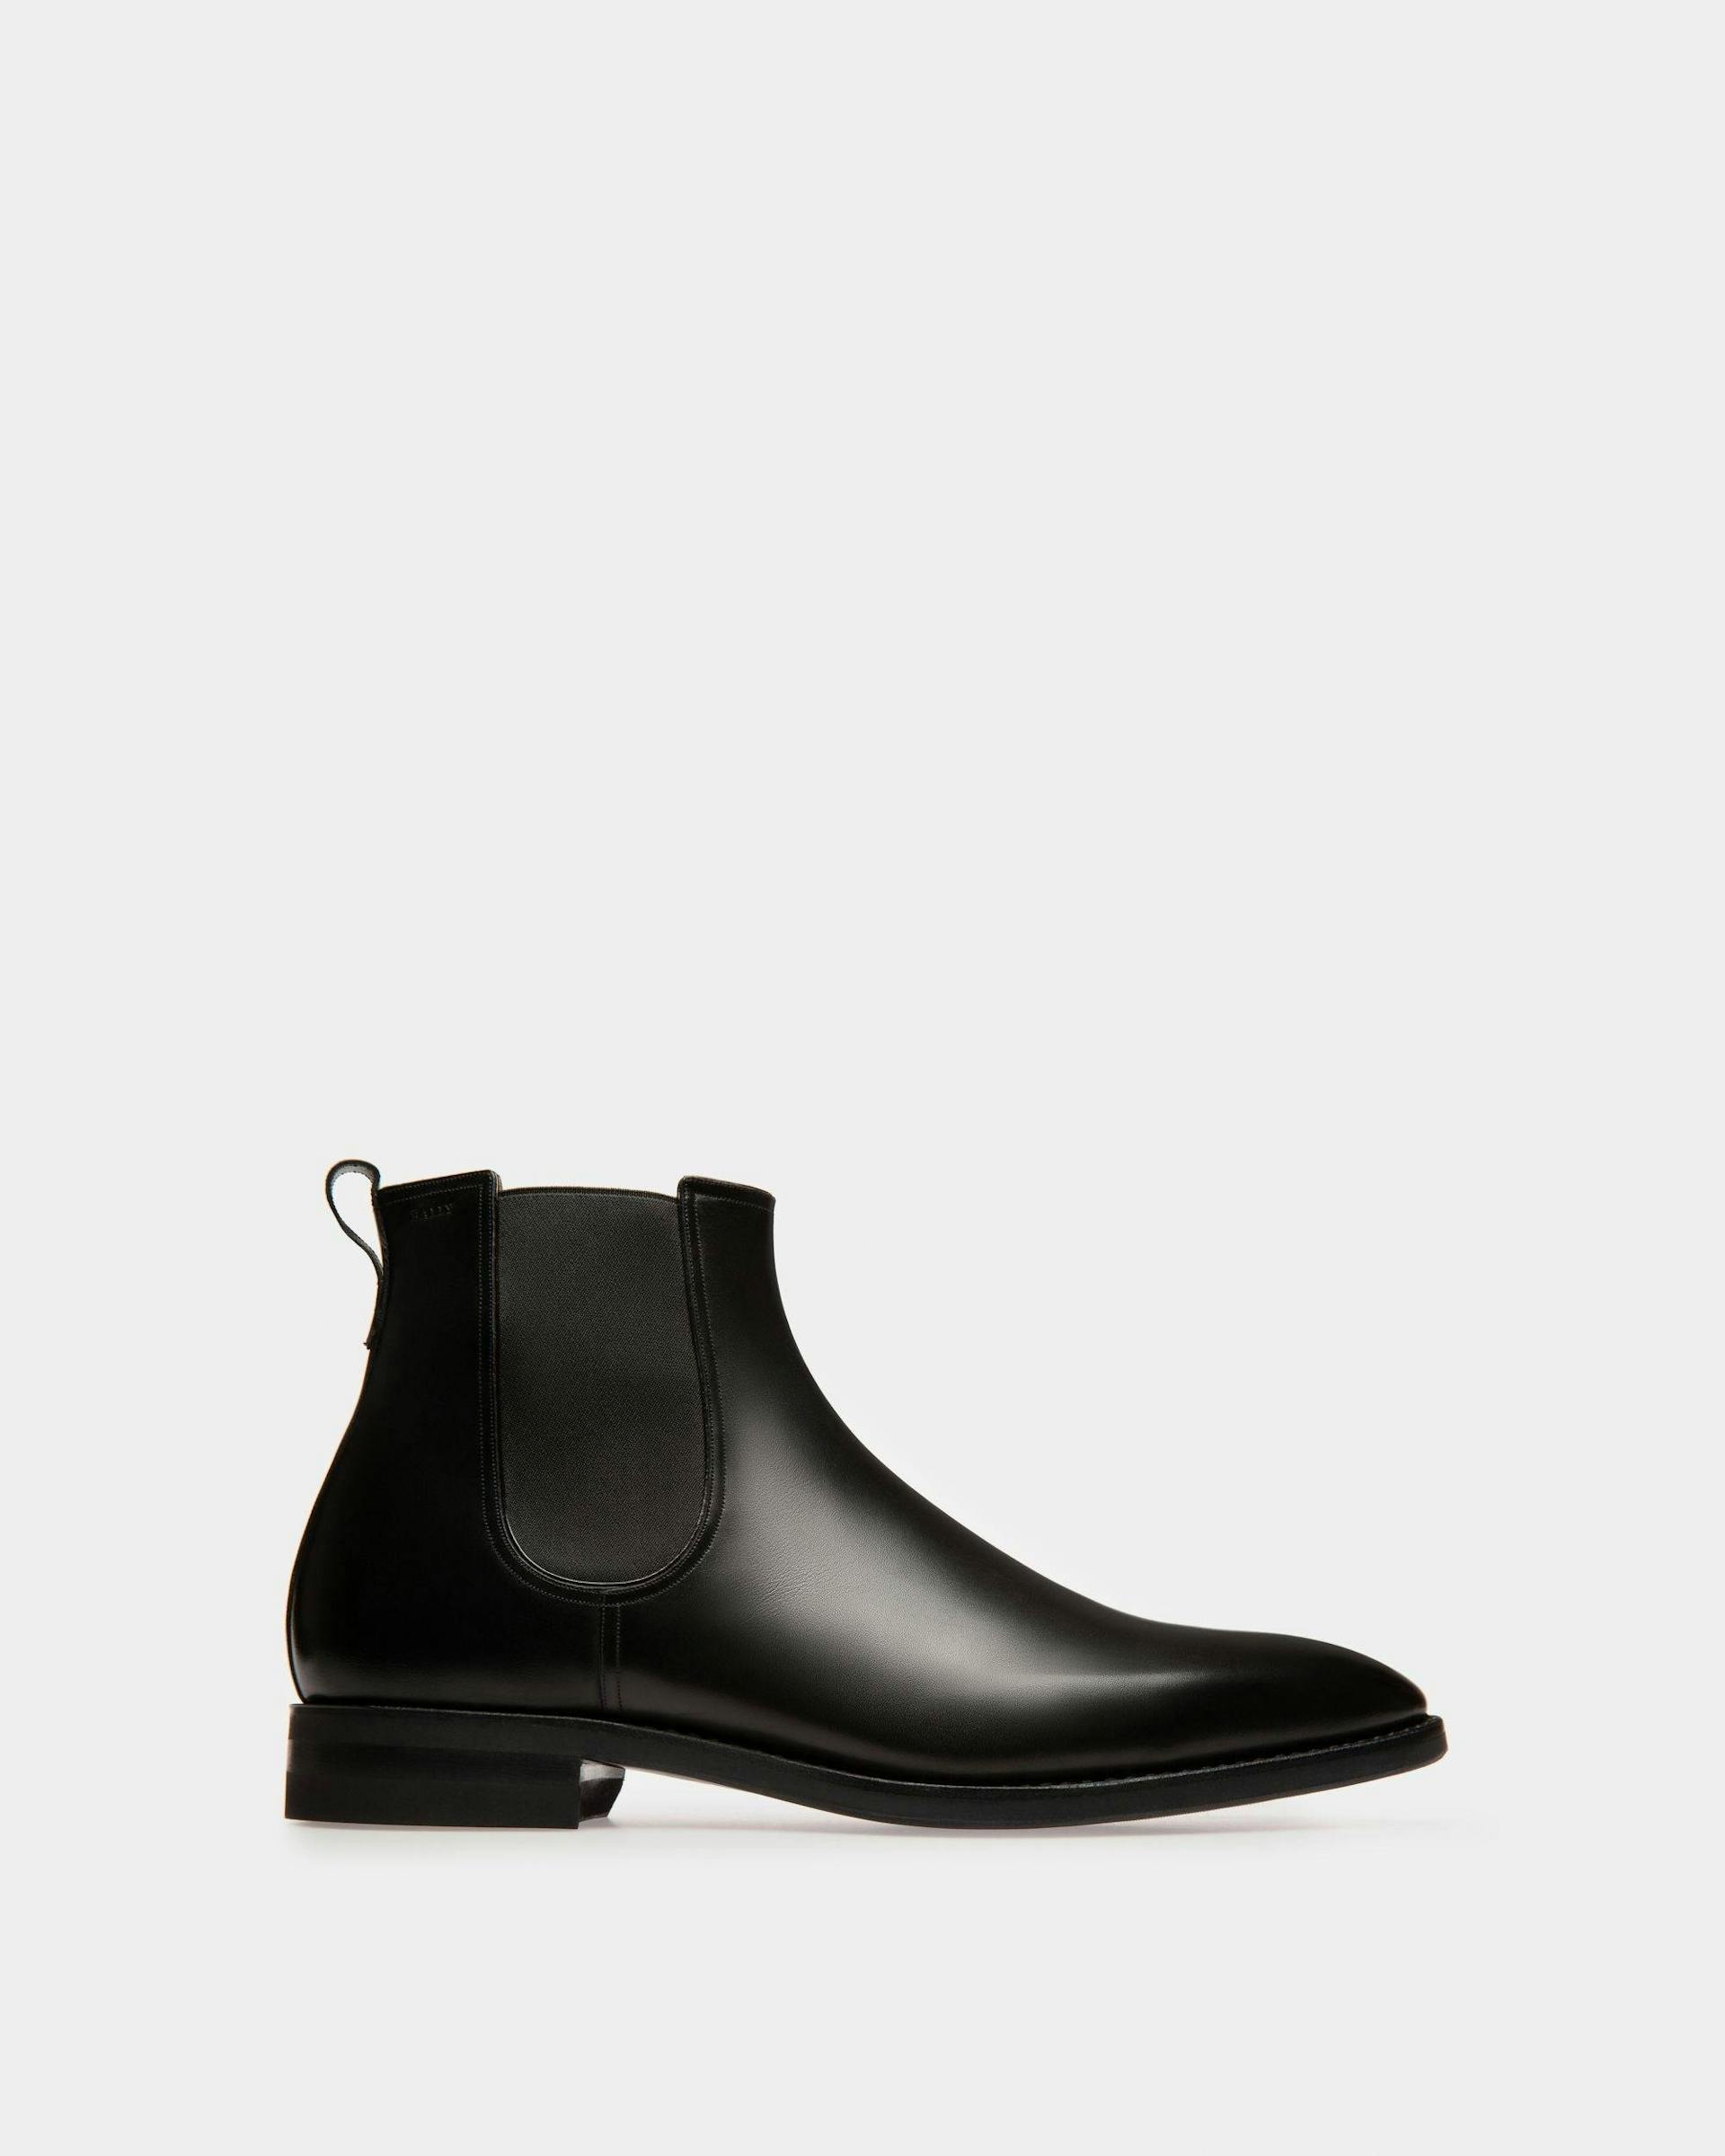 Scavone | Men's Boots | Bally Shoes